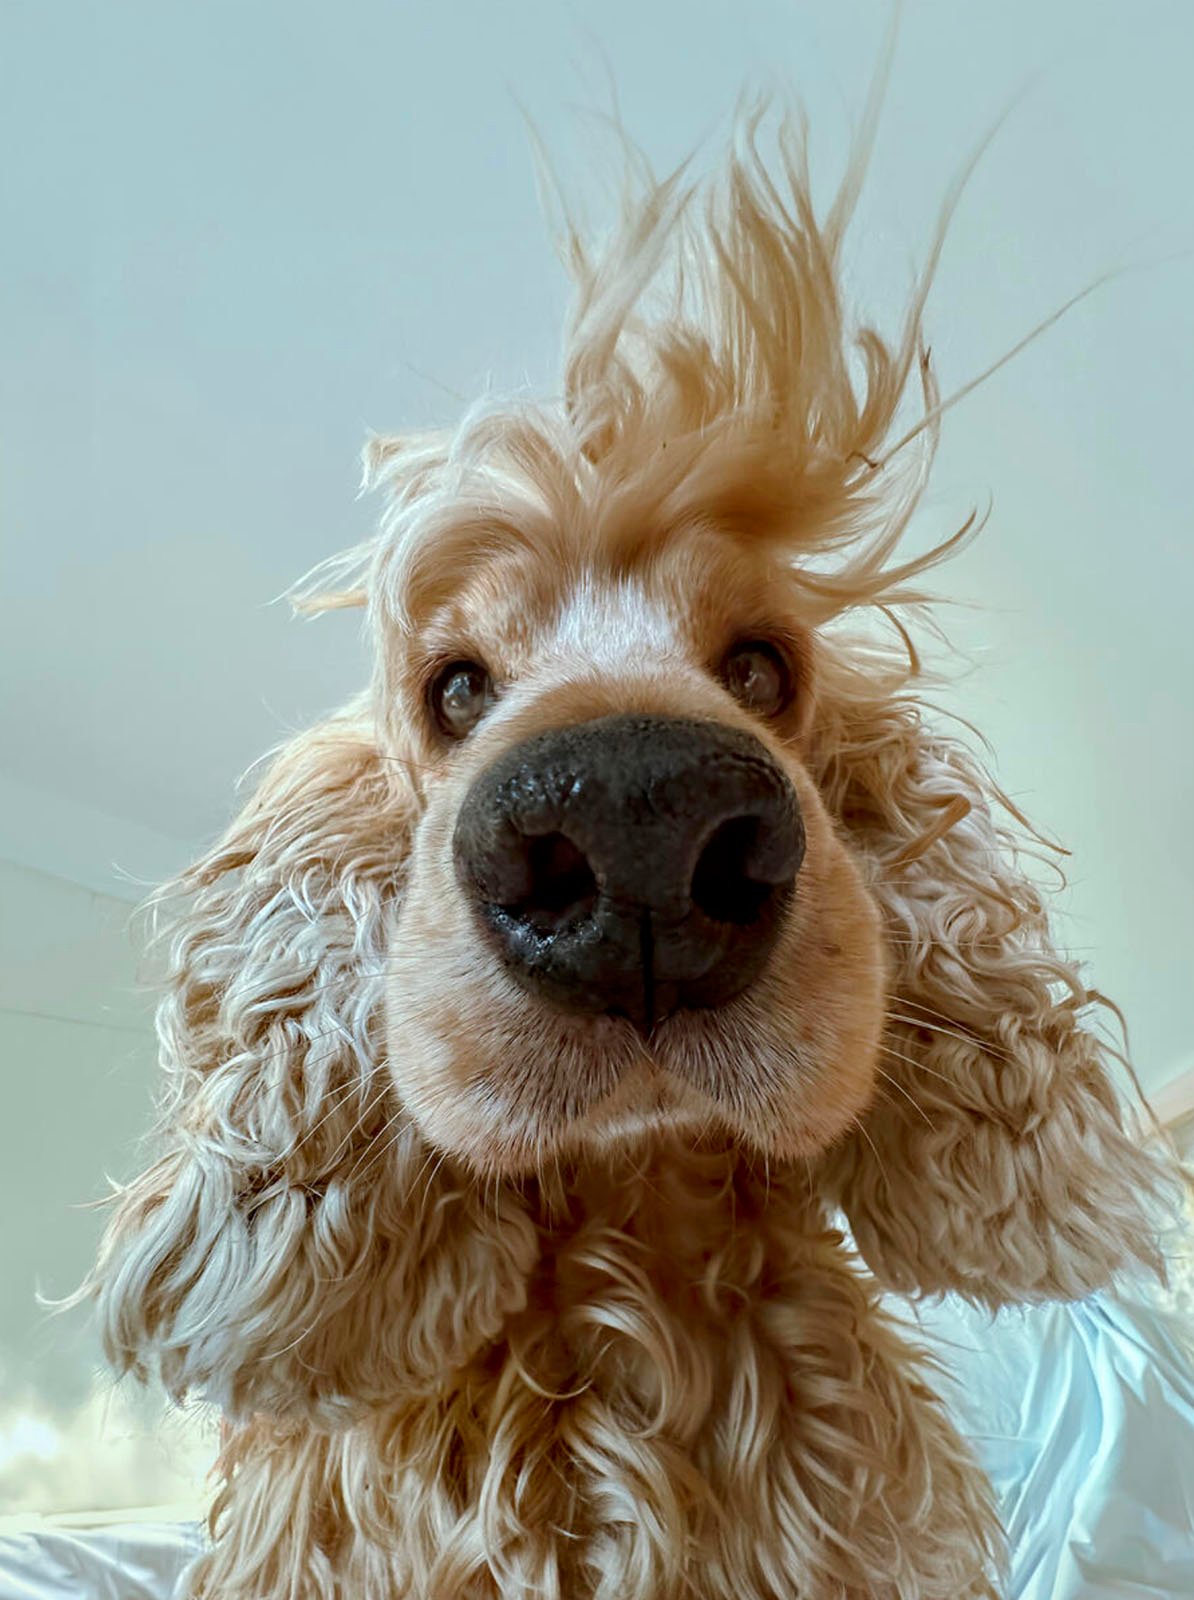 Close-up of a playful golden cocker spaniel looking directly at the camera with its hair tousled and ears flying up, giving a joyful and whimsical expression.